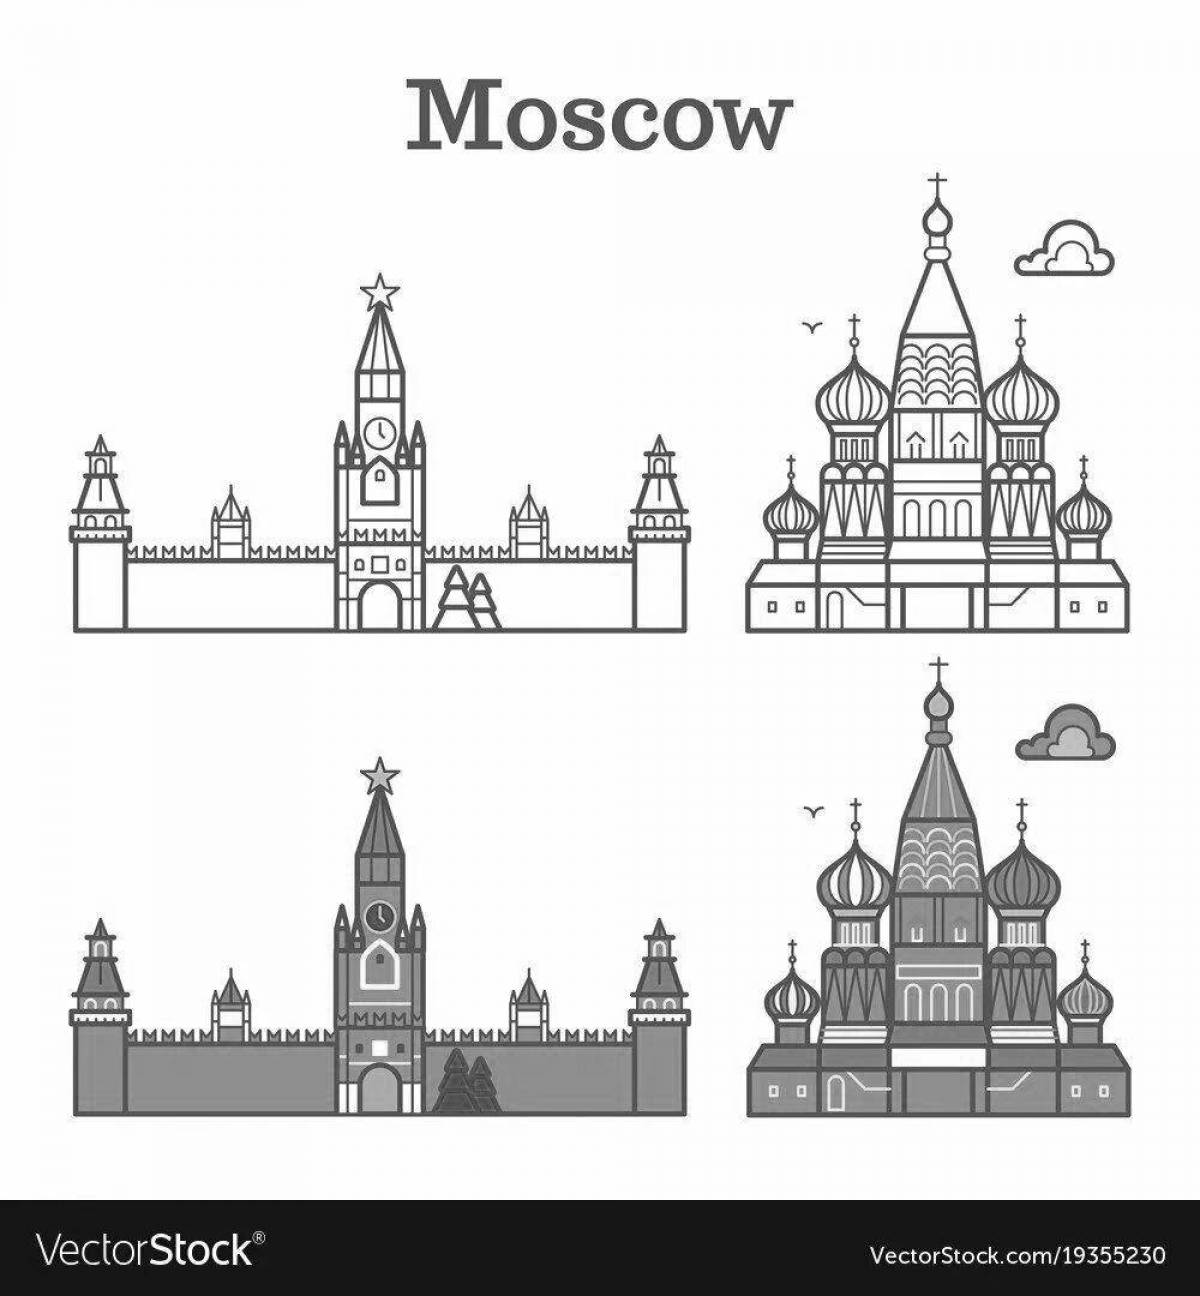 Interesting red square coloring book for kids